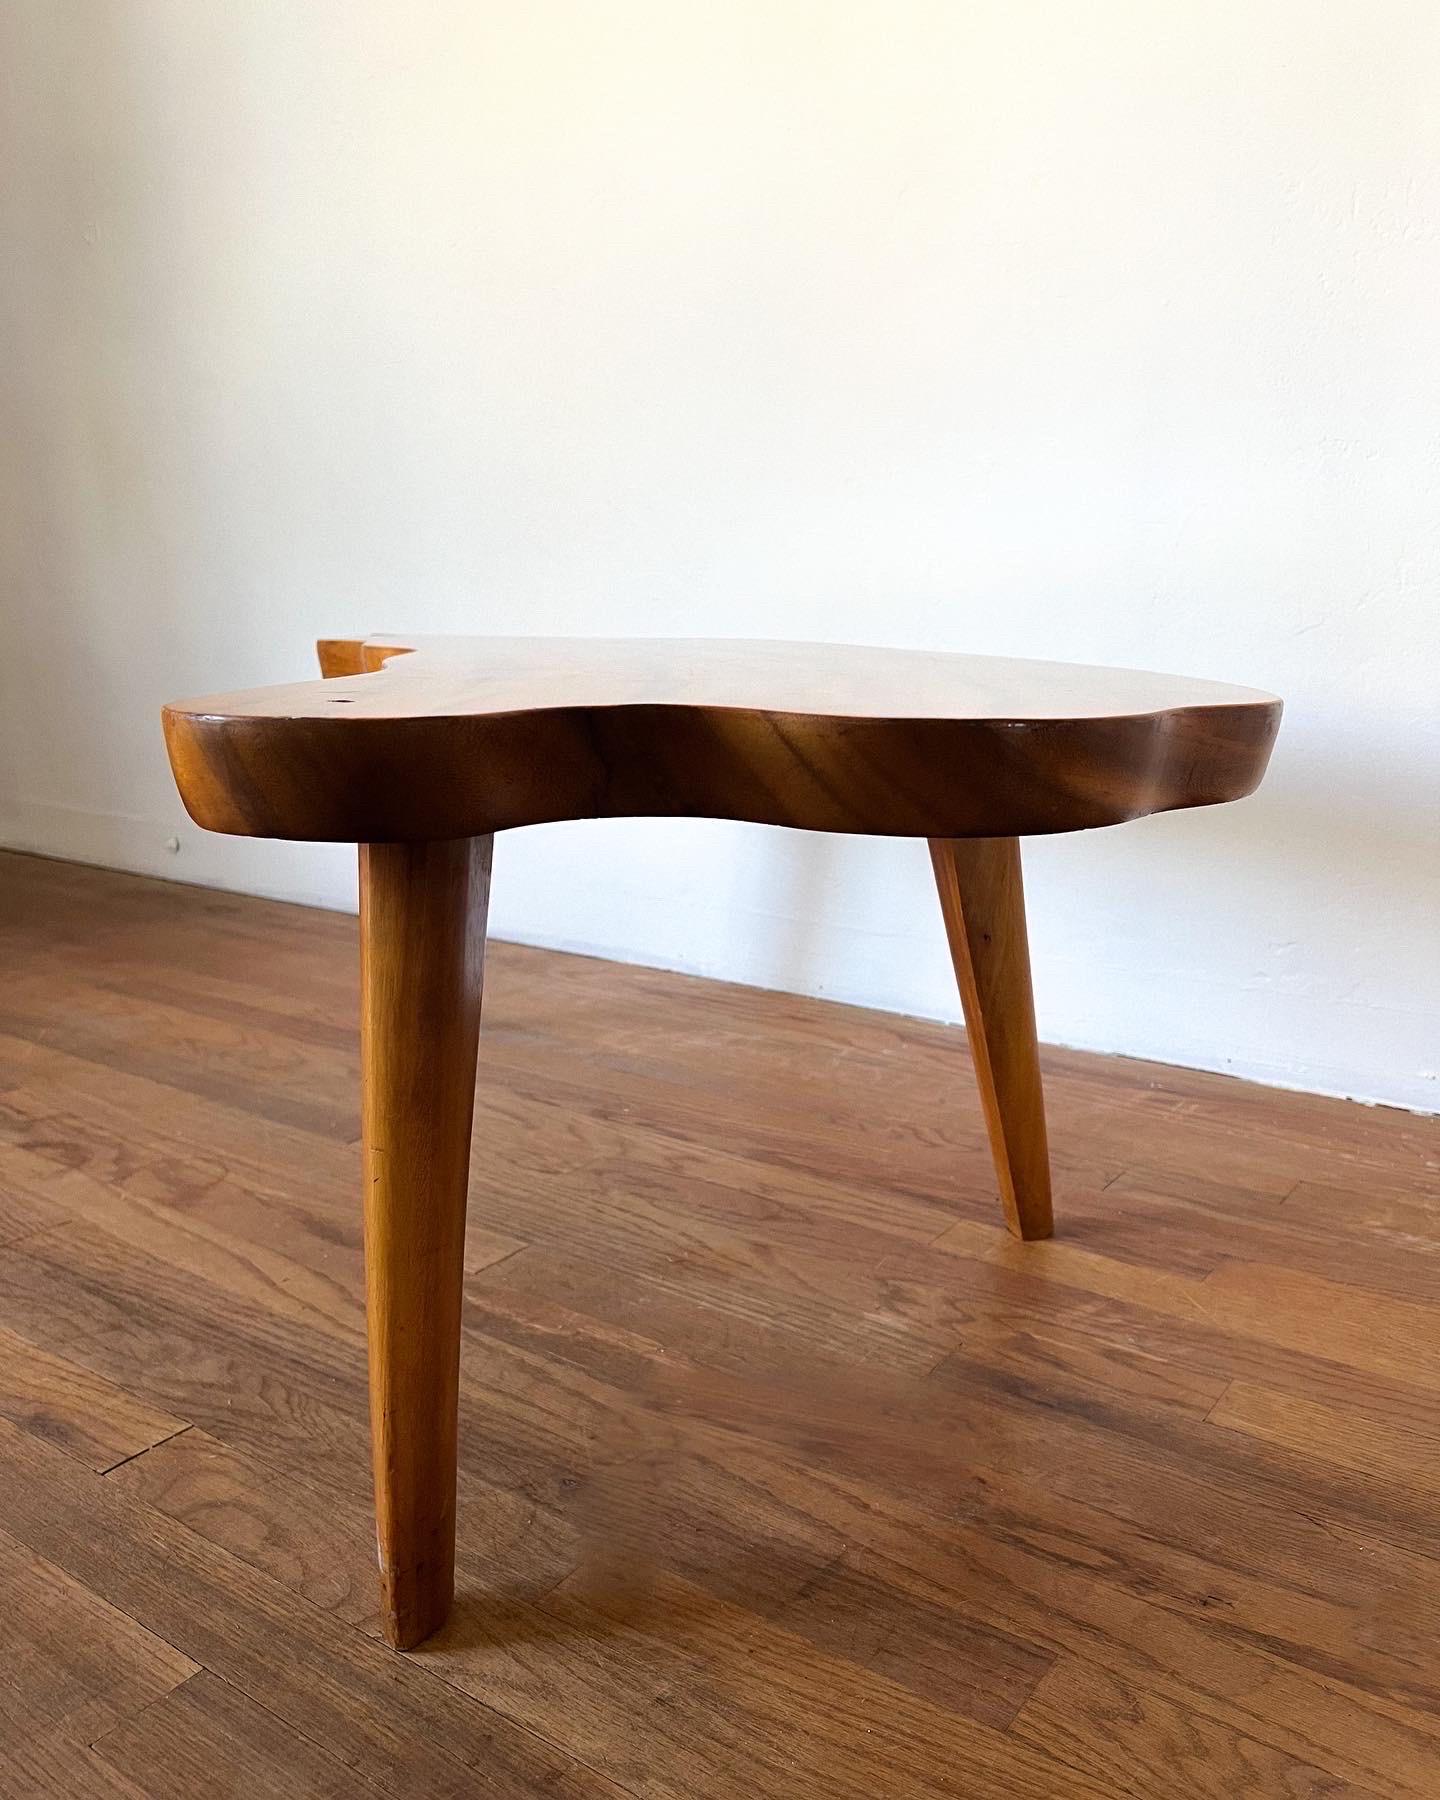 North American Mid-Century Biomorphic Monkey Pod Table For Sale